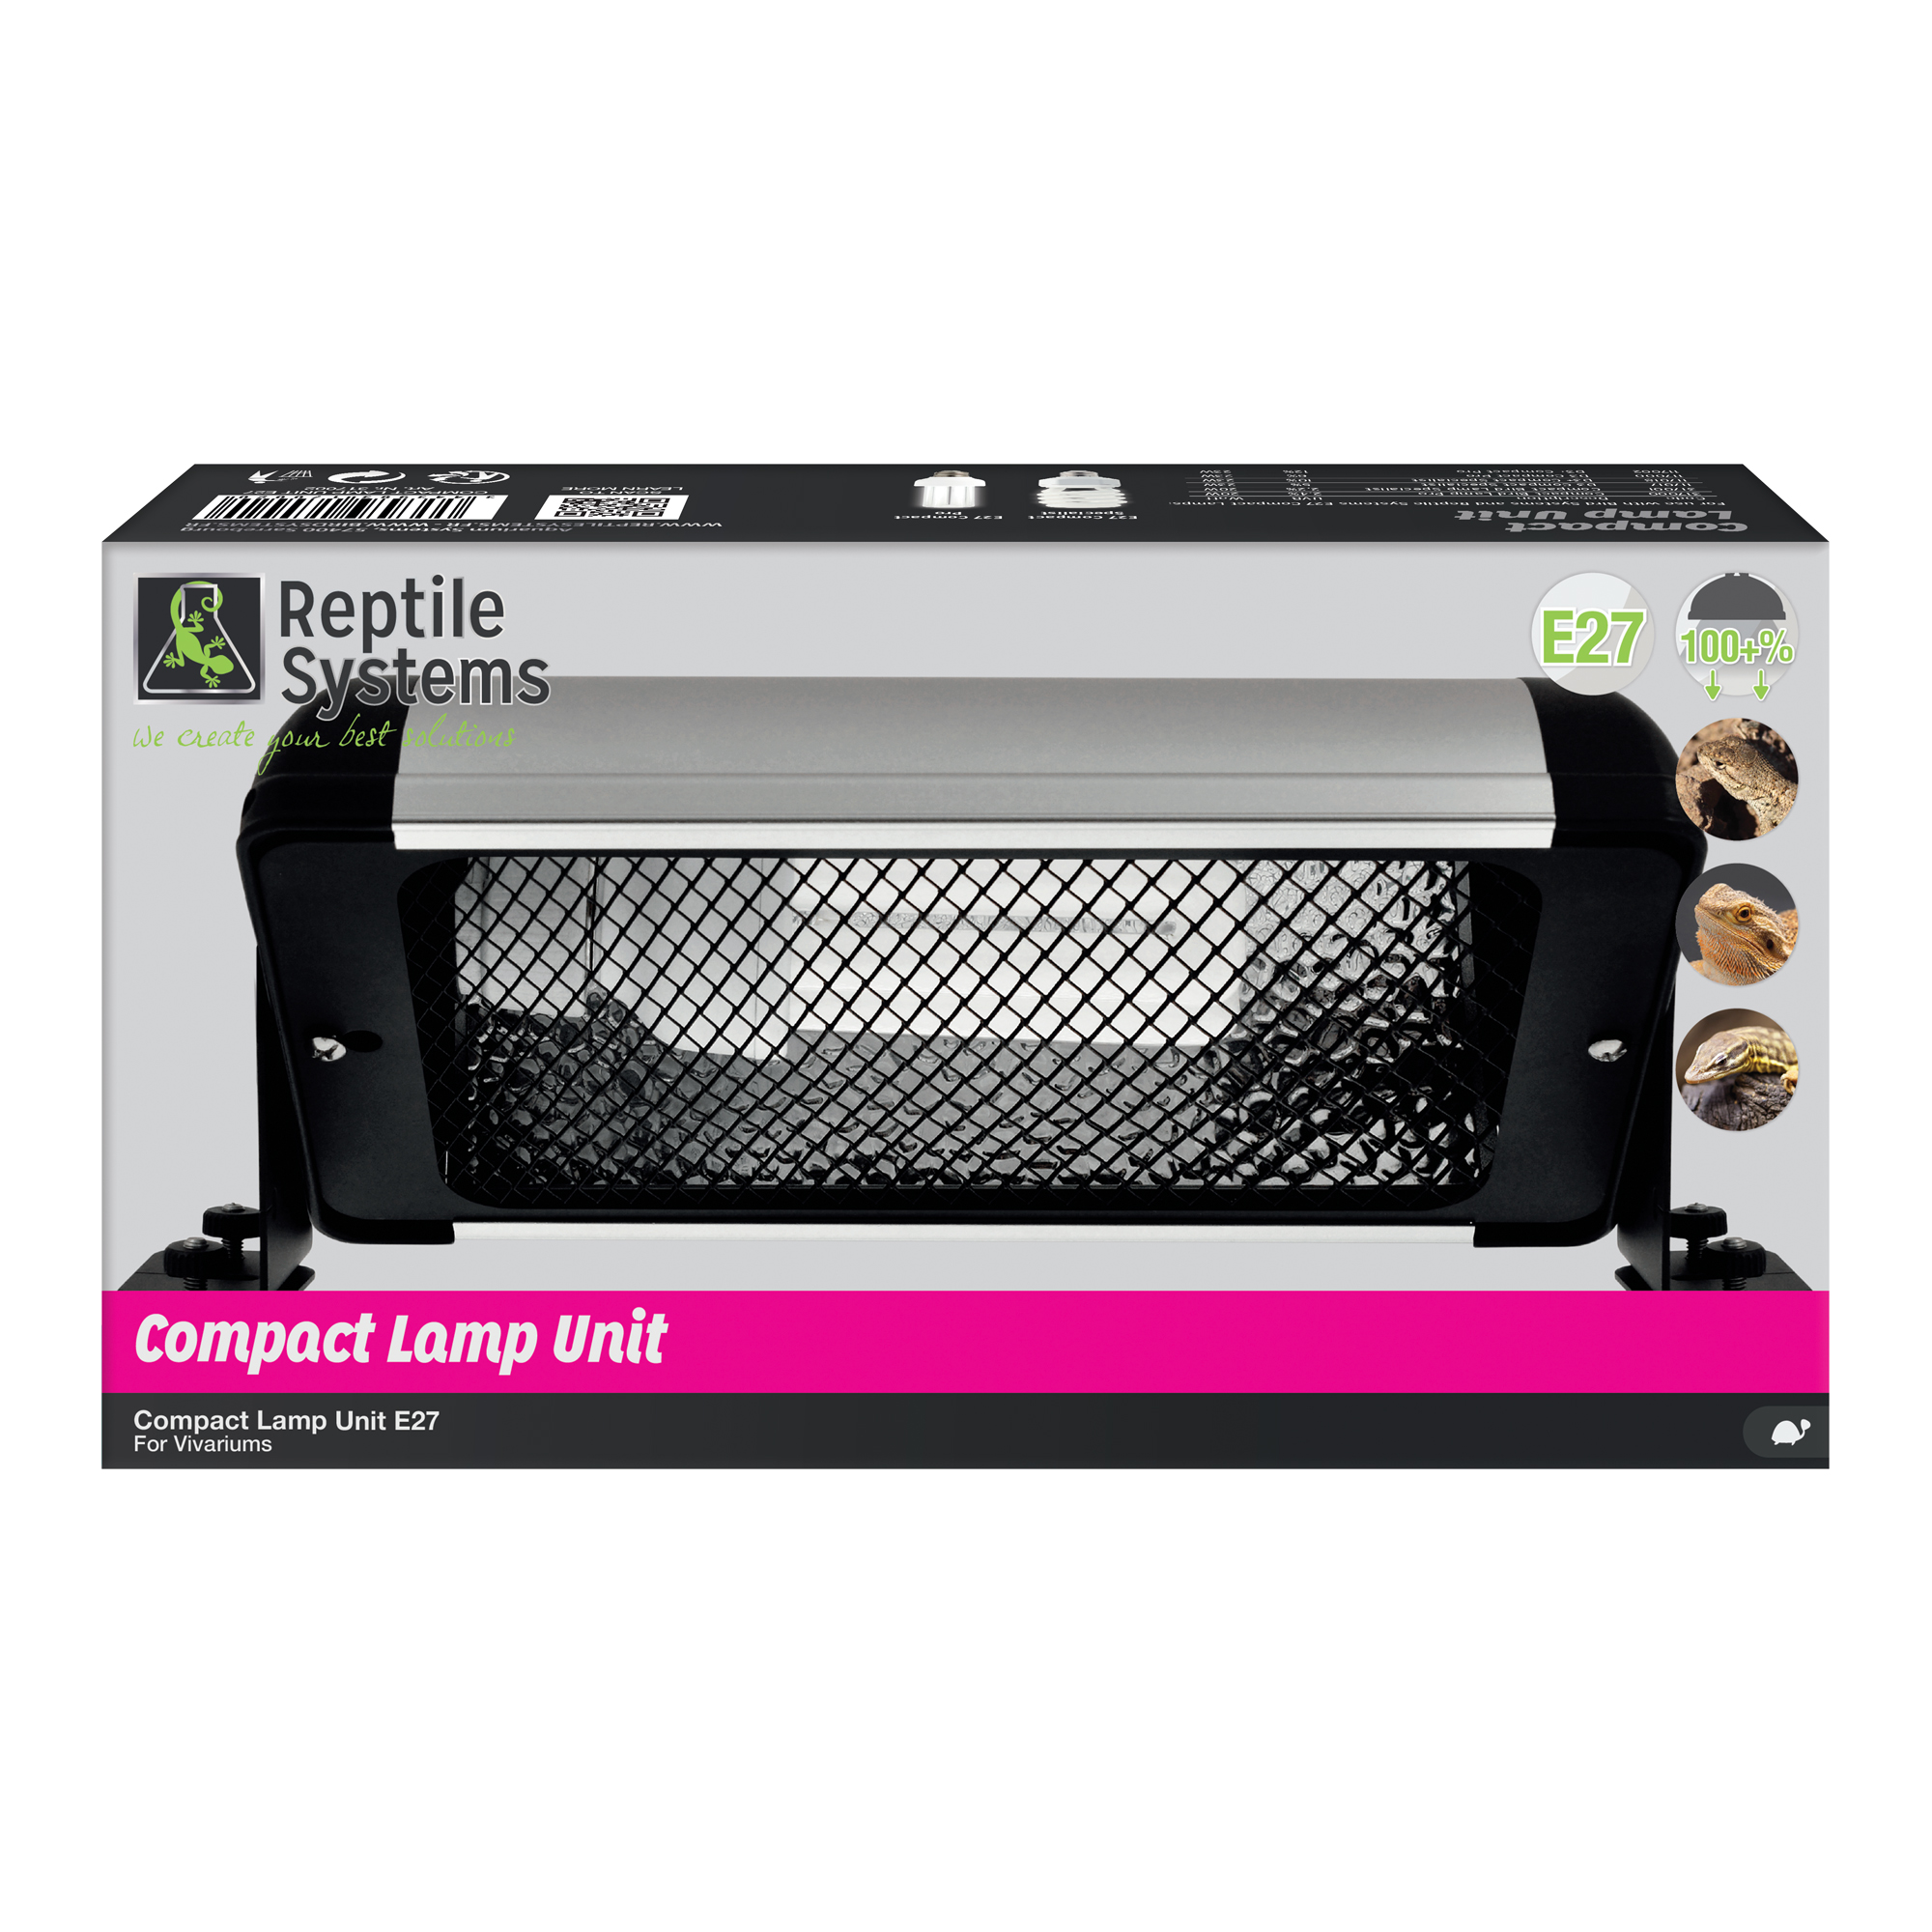 Compact Lamp Unit Reptile Systems UK